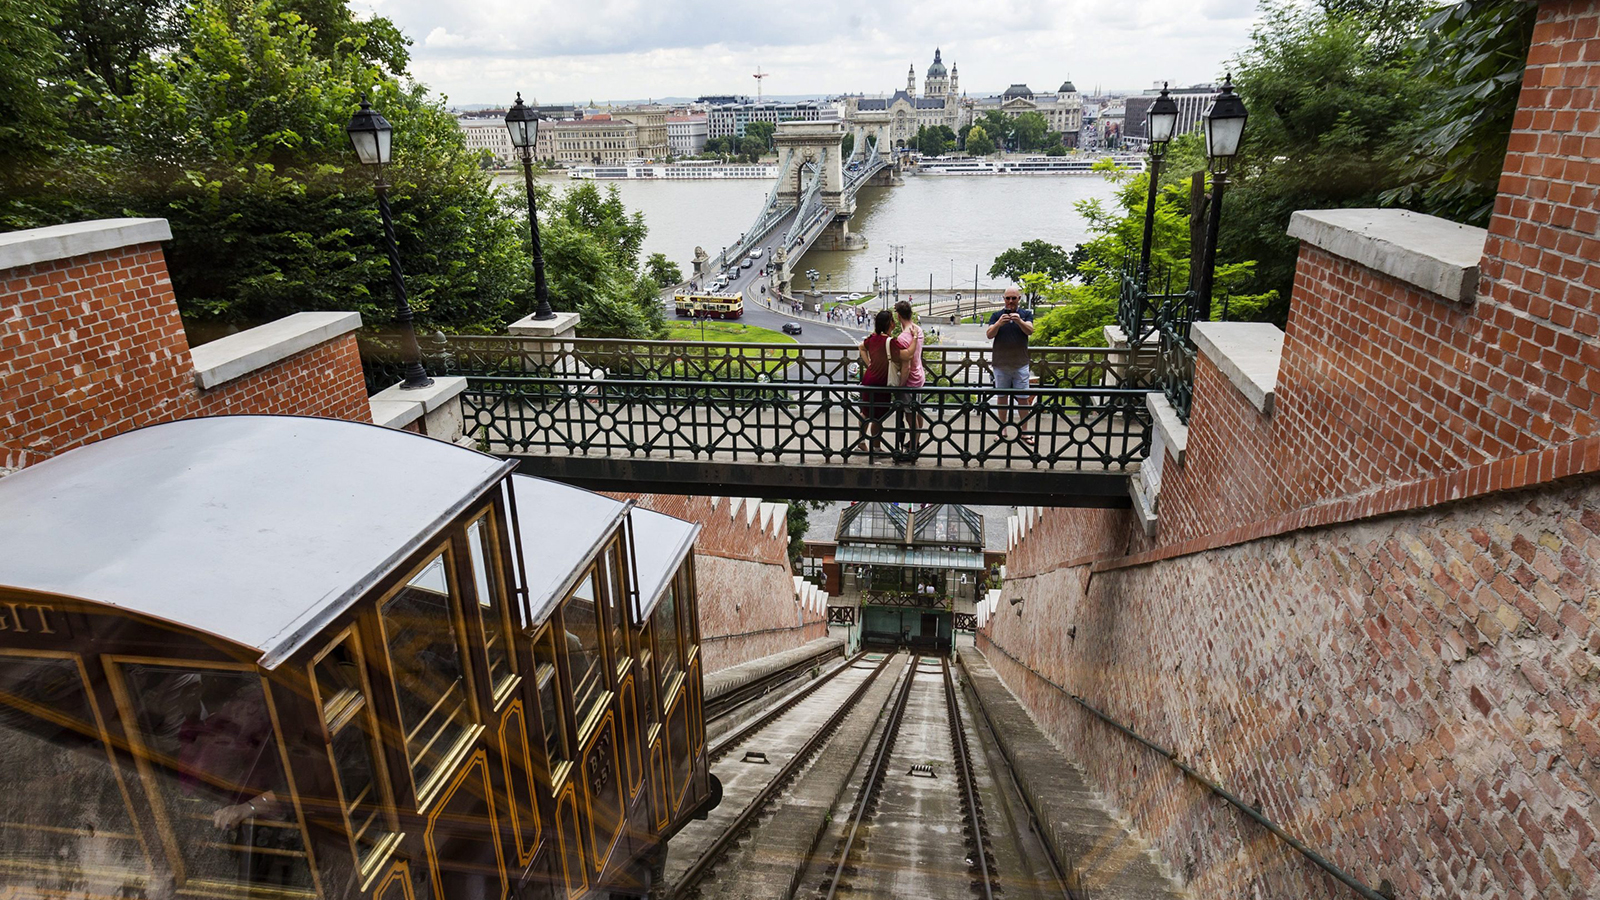 Kids Ride For HUF 100 On Chairlift & Funicular In Budapest Until 3 January